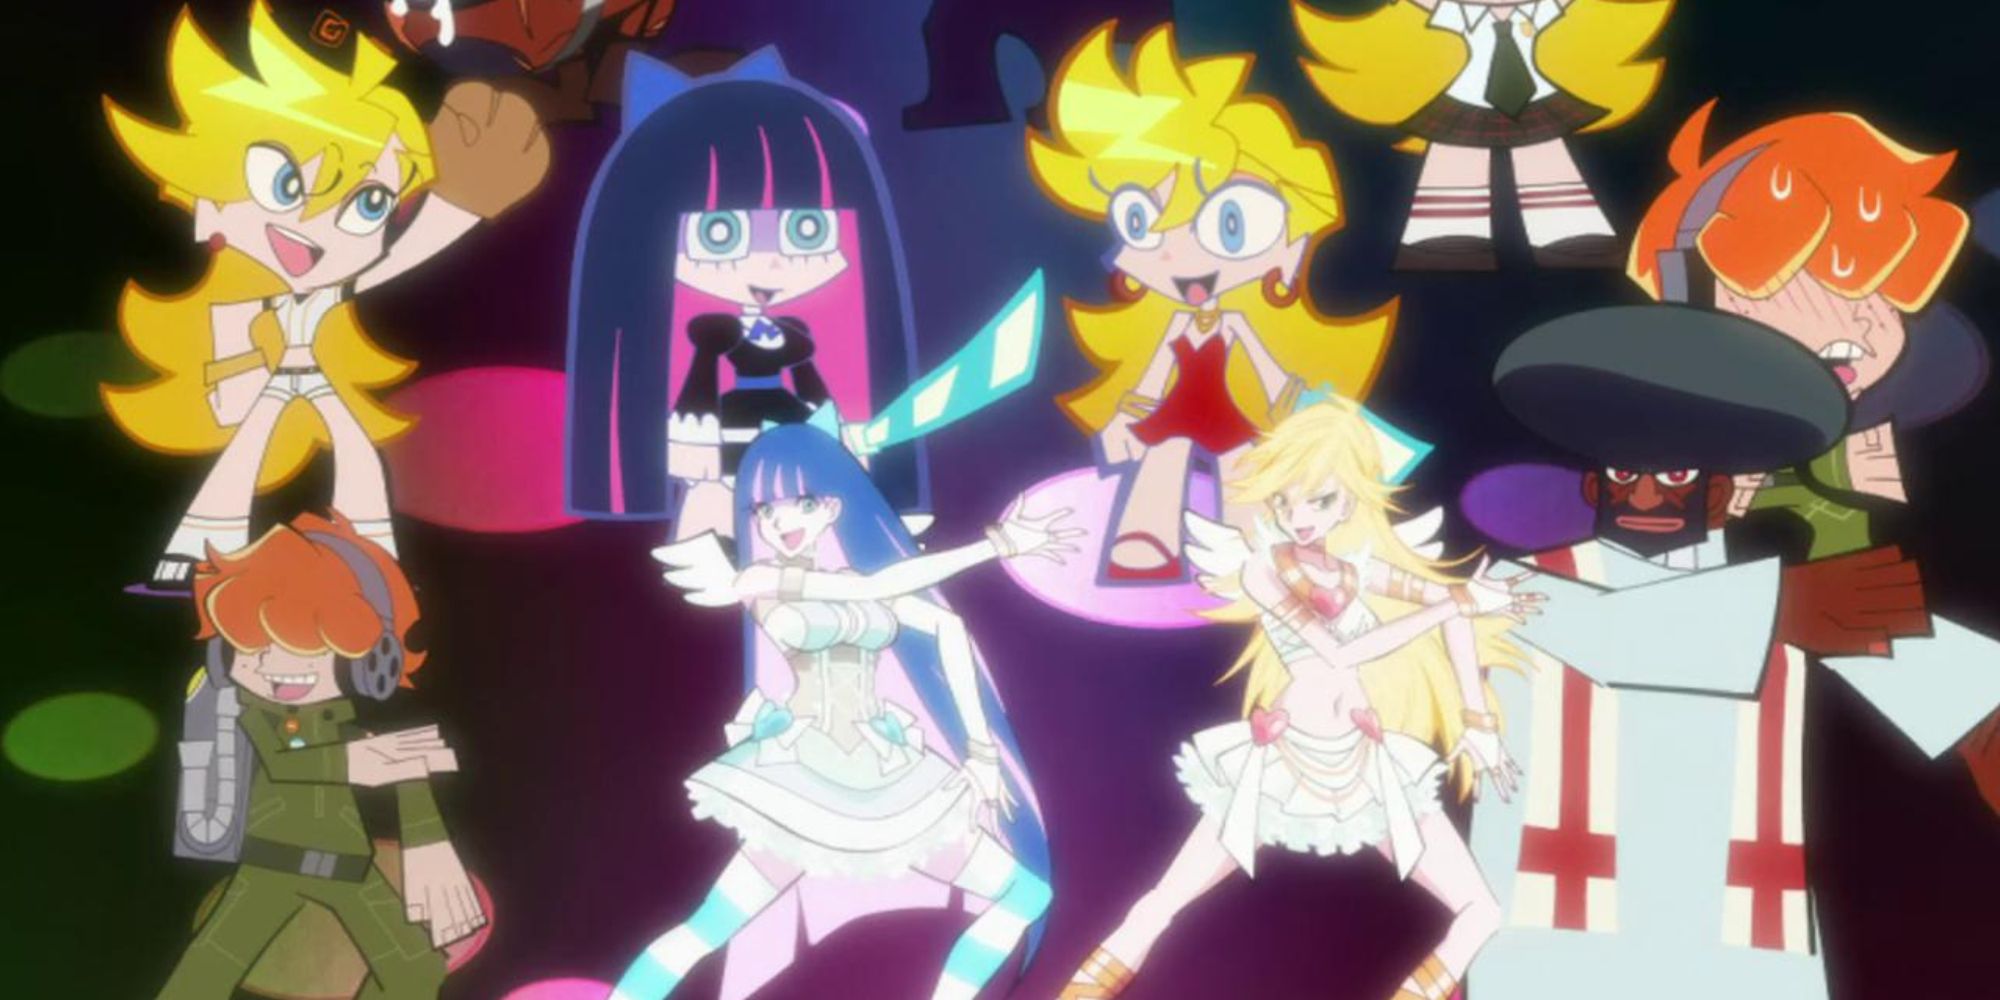 Panty & Stocking with Garterbelt  characters dancing